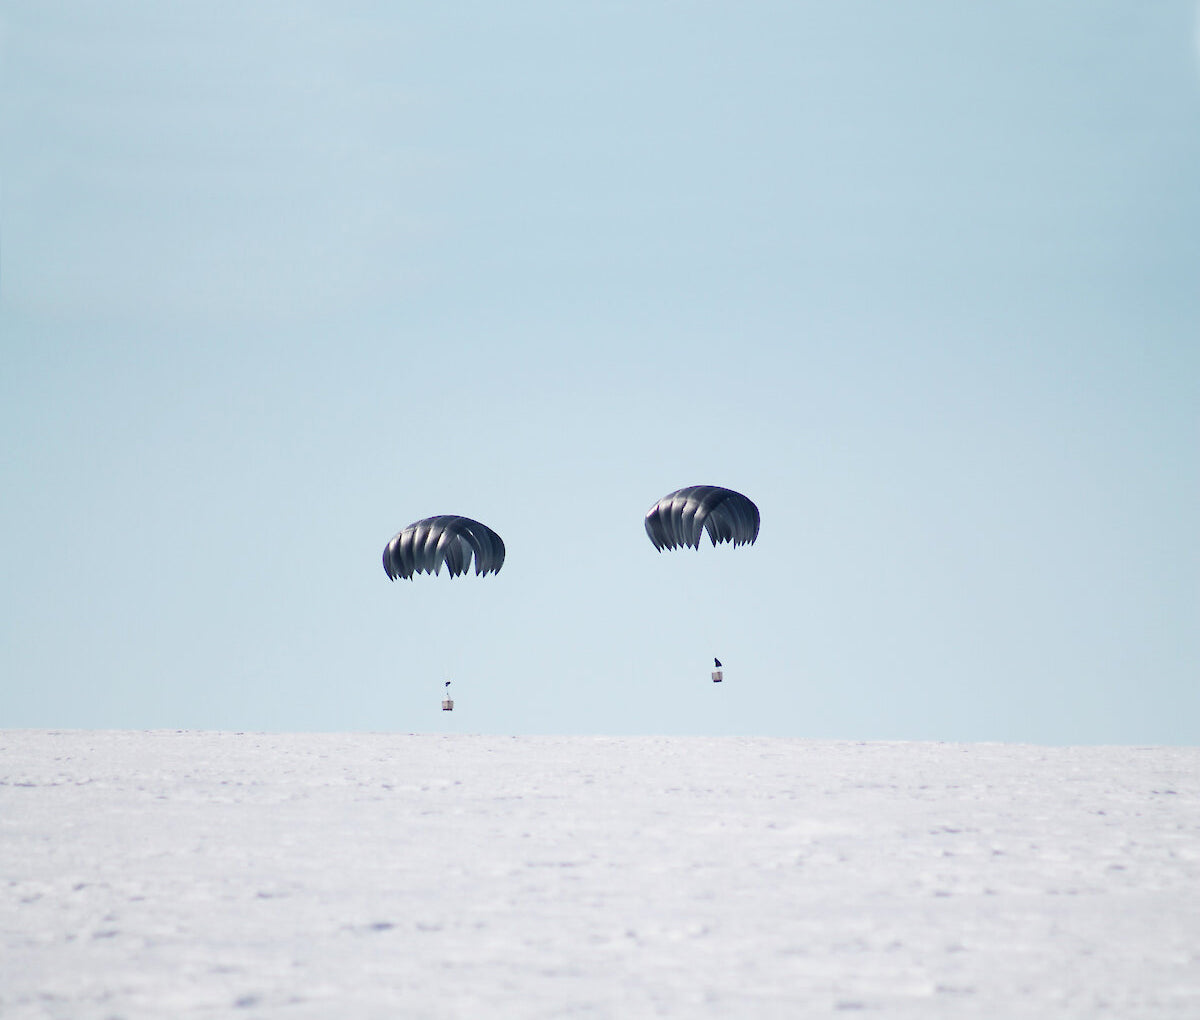 LCADS Low Velocity Cargo Parachutes airdropped payloads in Antartica with a mission of resupplying scientists.